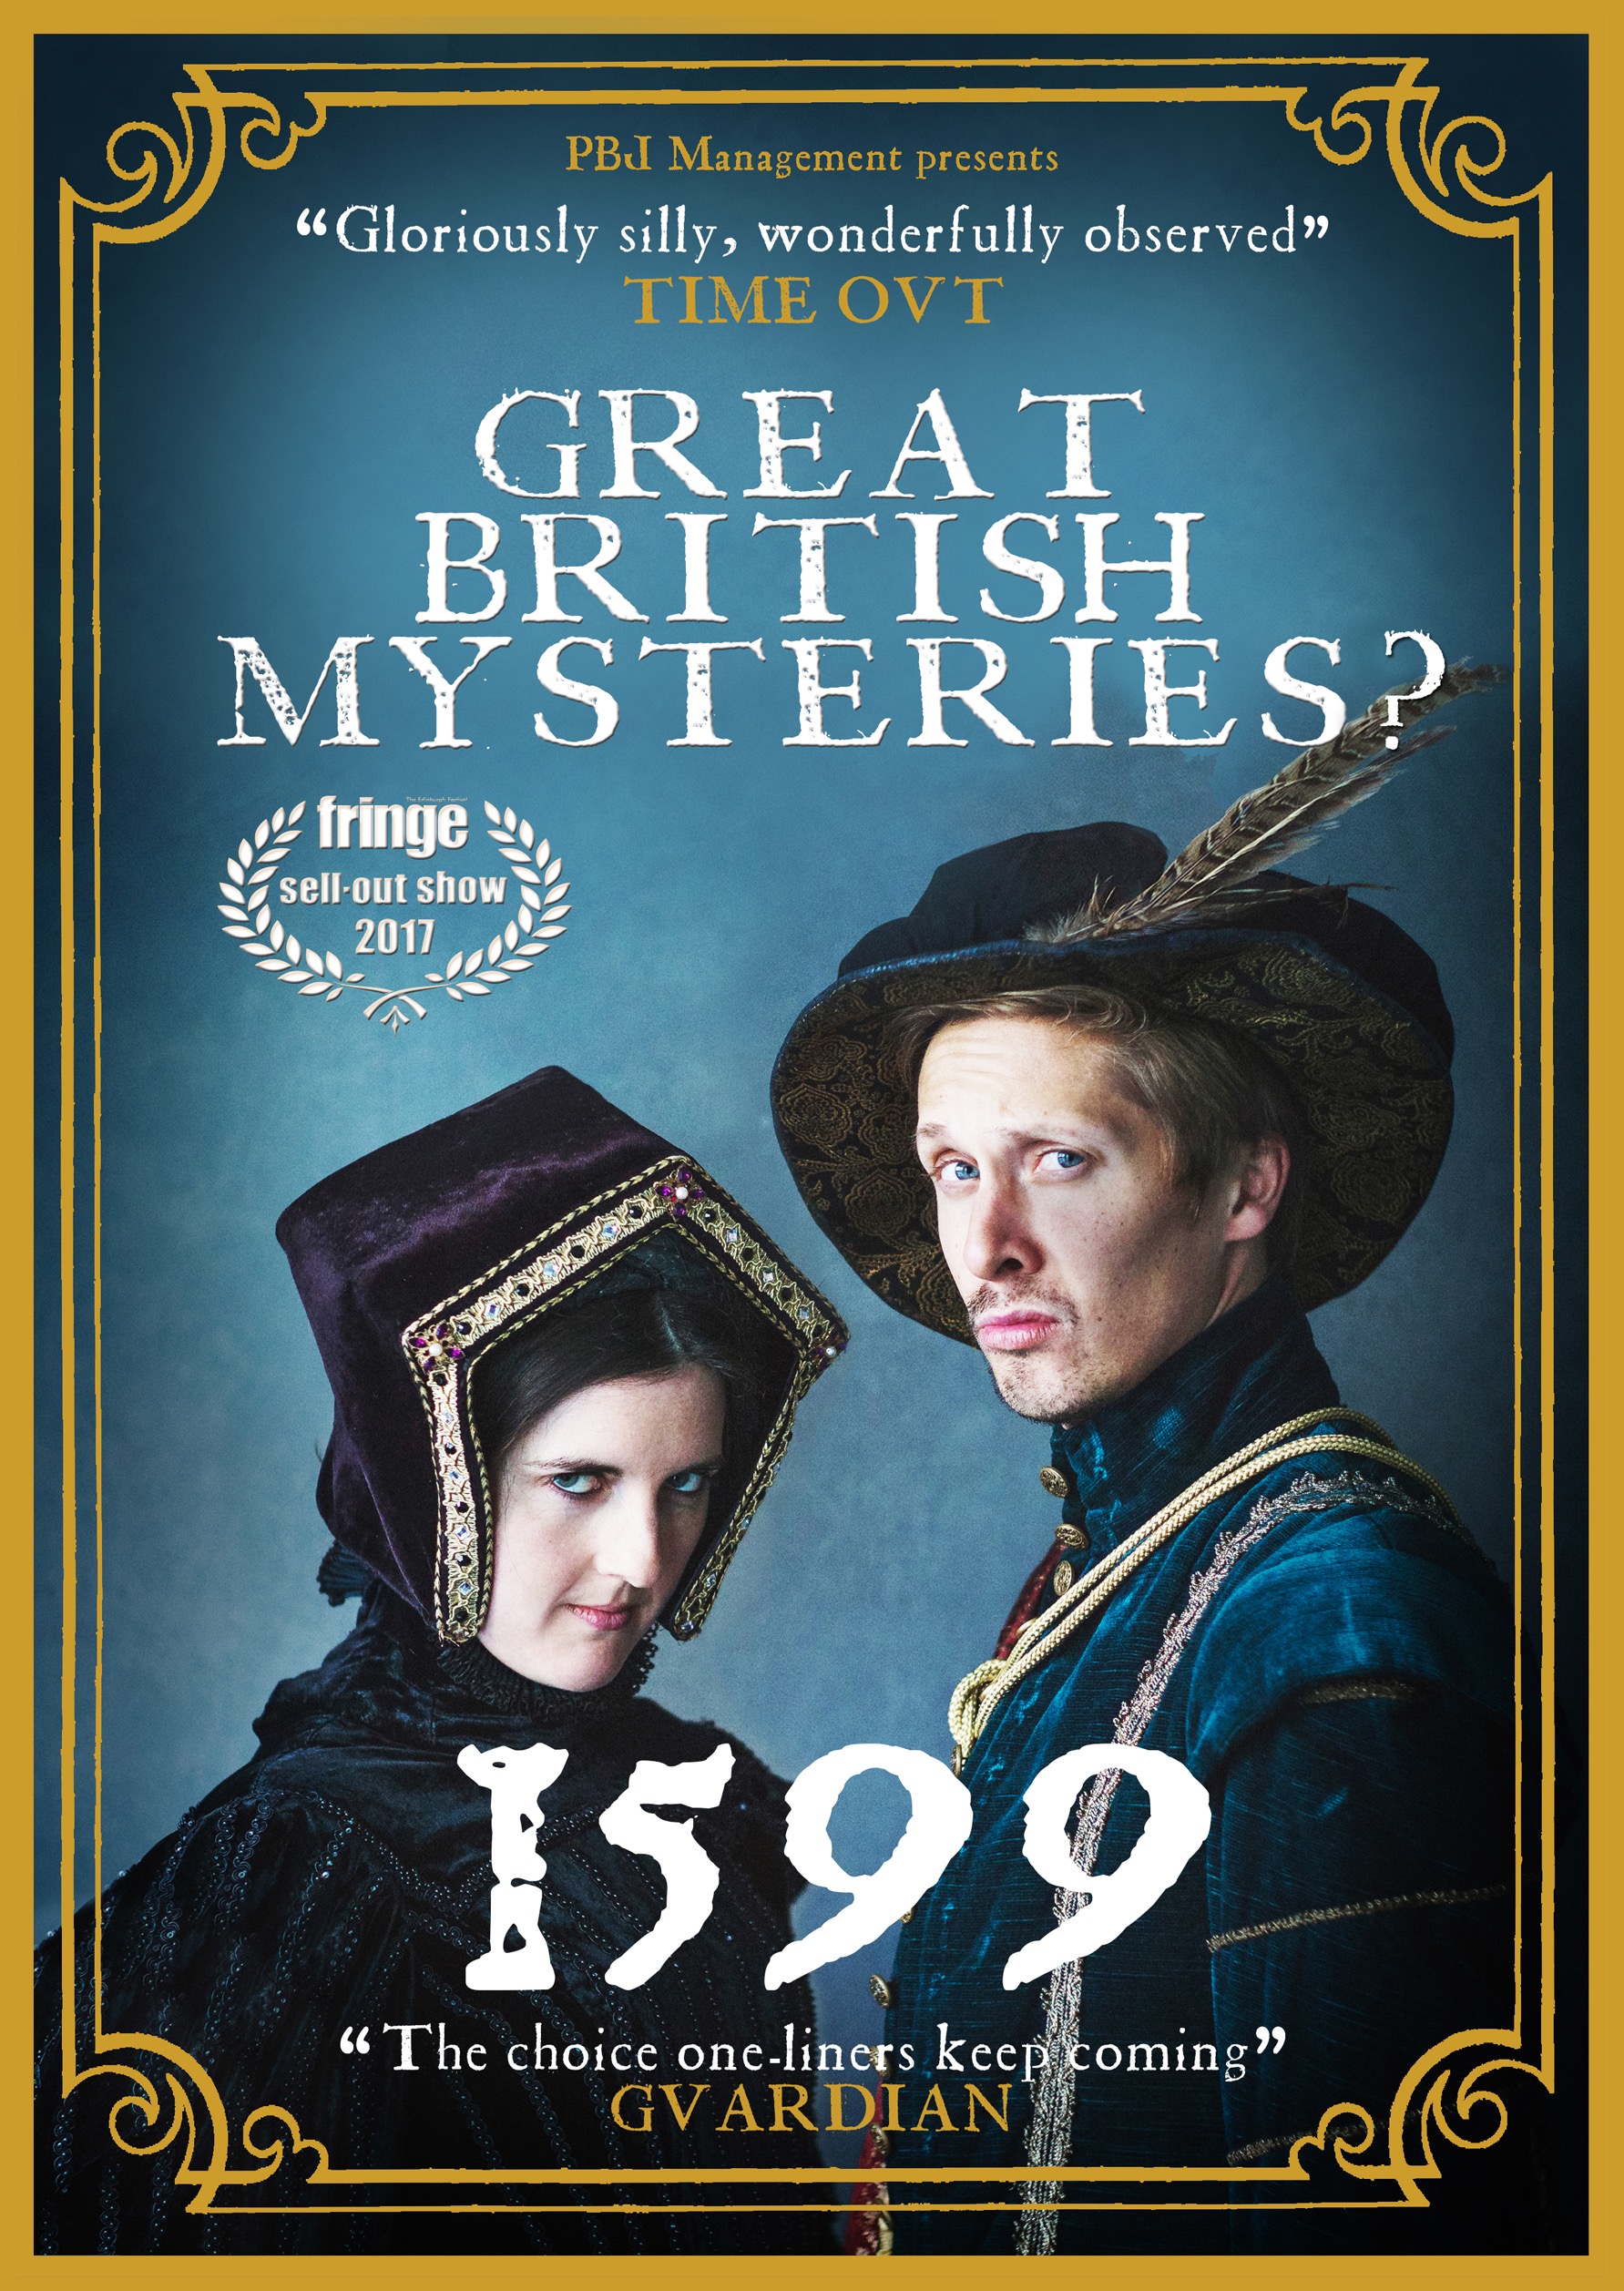 The poster for Great British Mysteries: 1599?